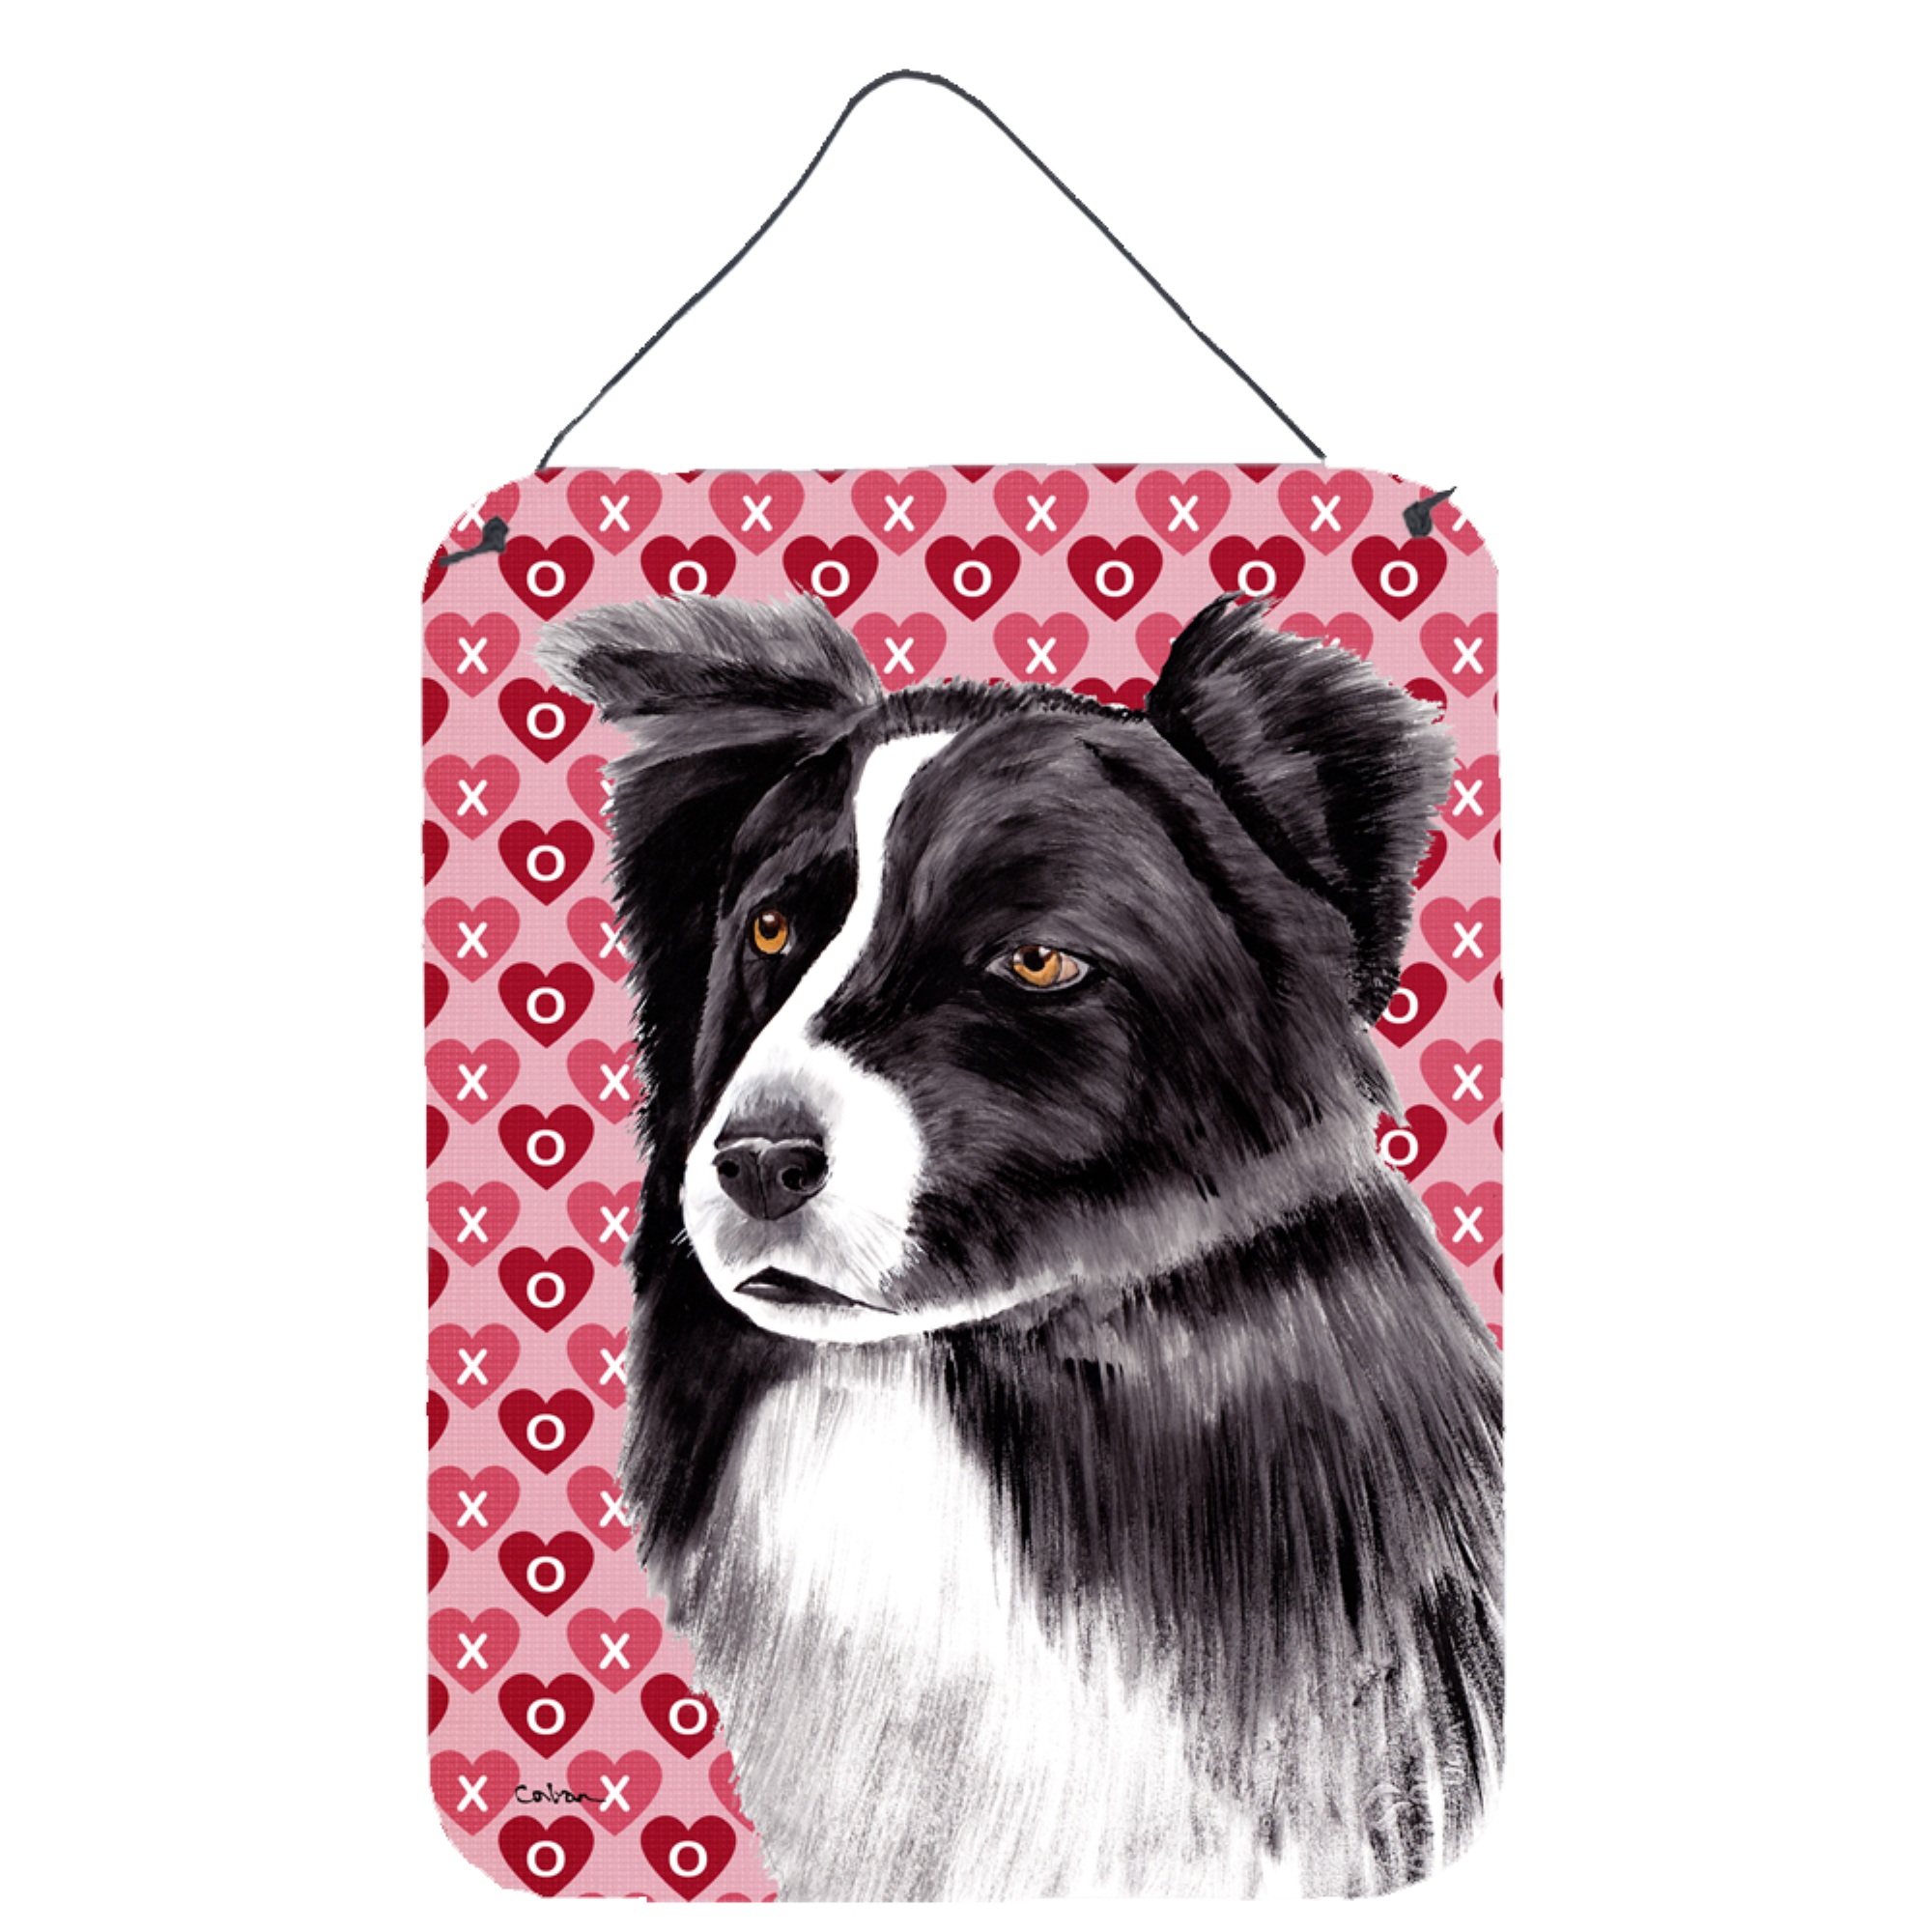 Caroline's Treasures "Caroline's Treasures Border Collie Hearts Love and Valentine's Day Wall or Door Hanging Prints, 16"" x 12"", Multicolor"